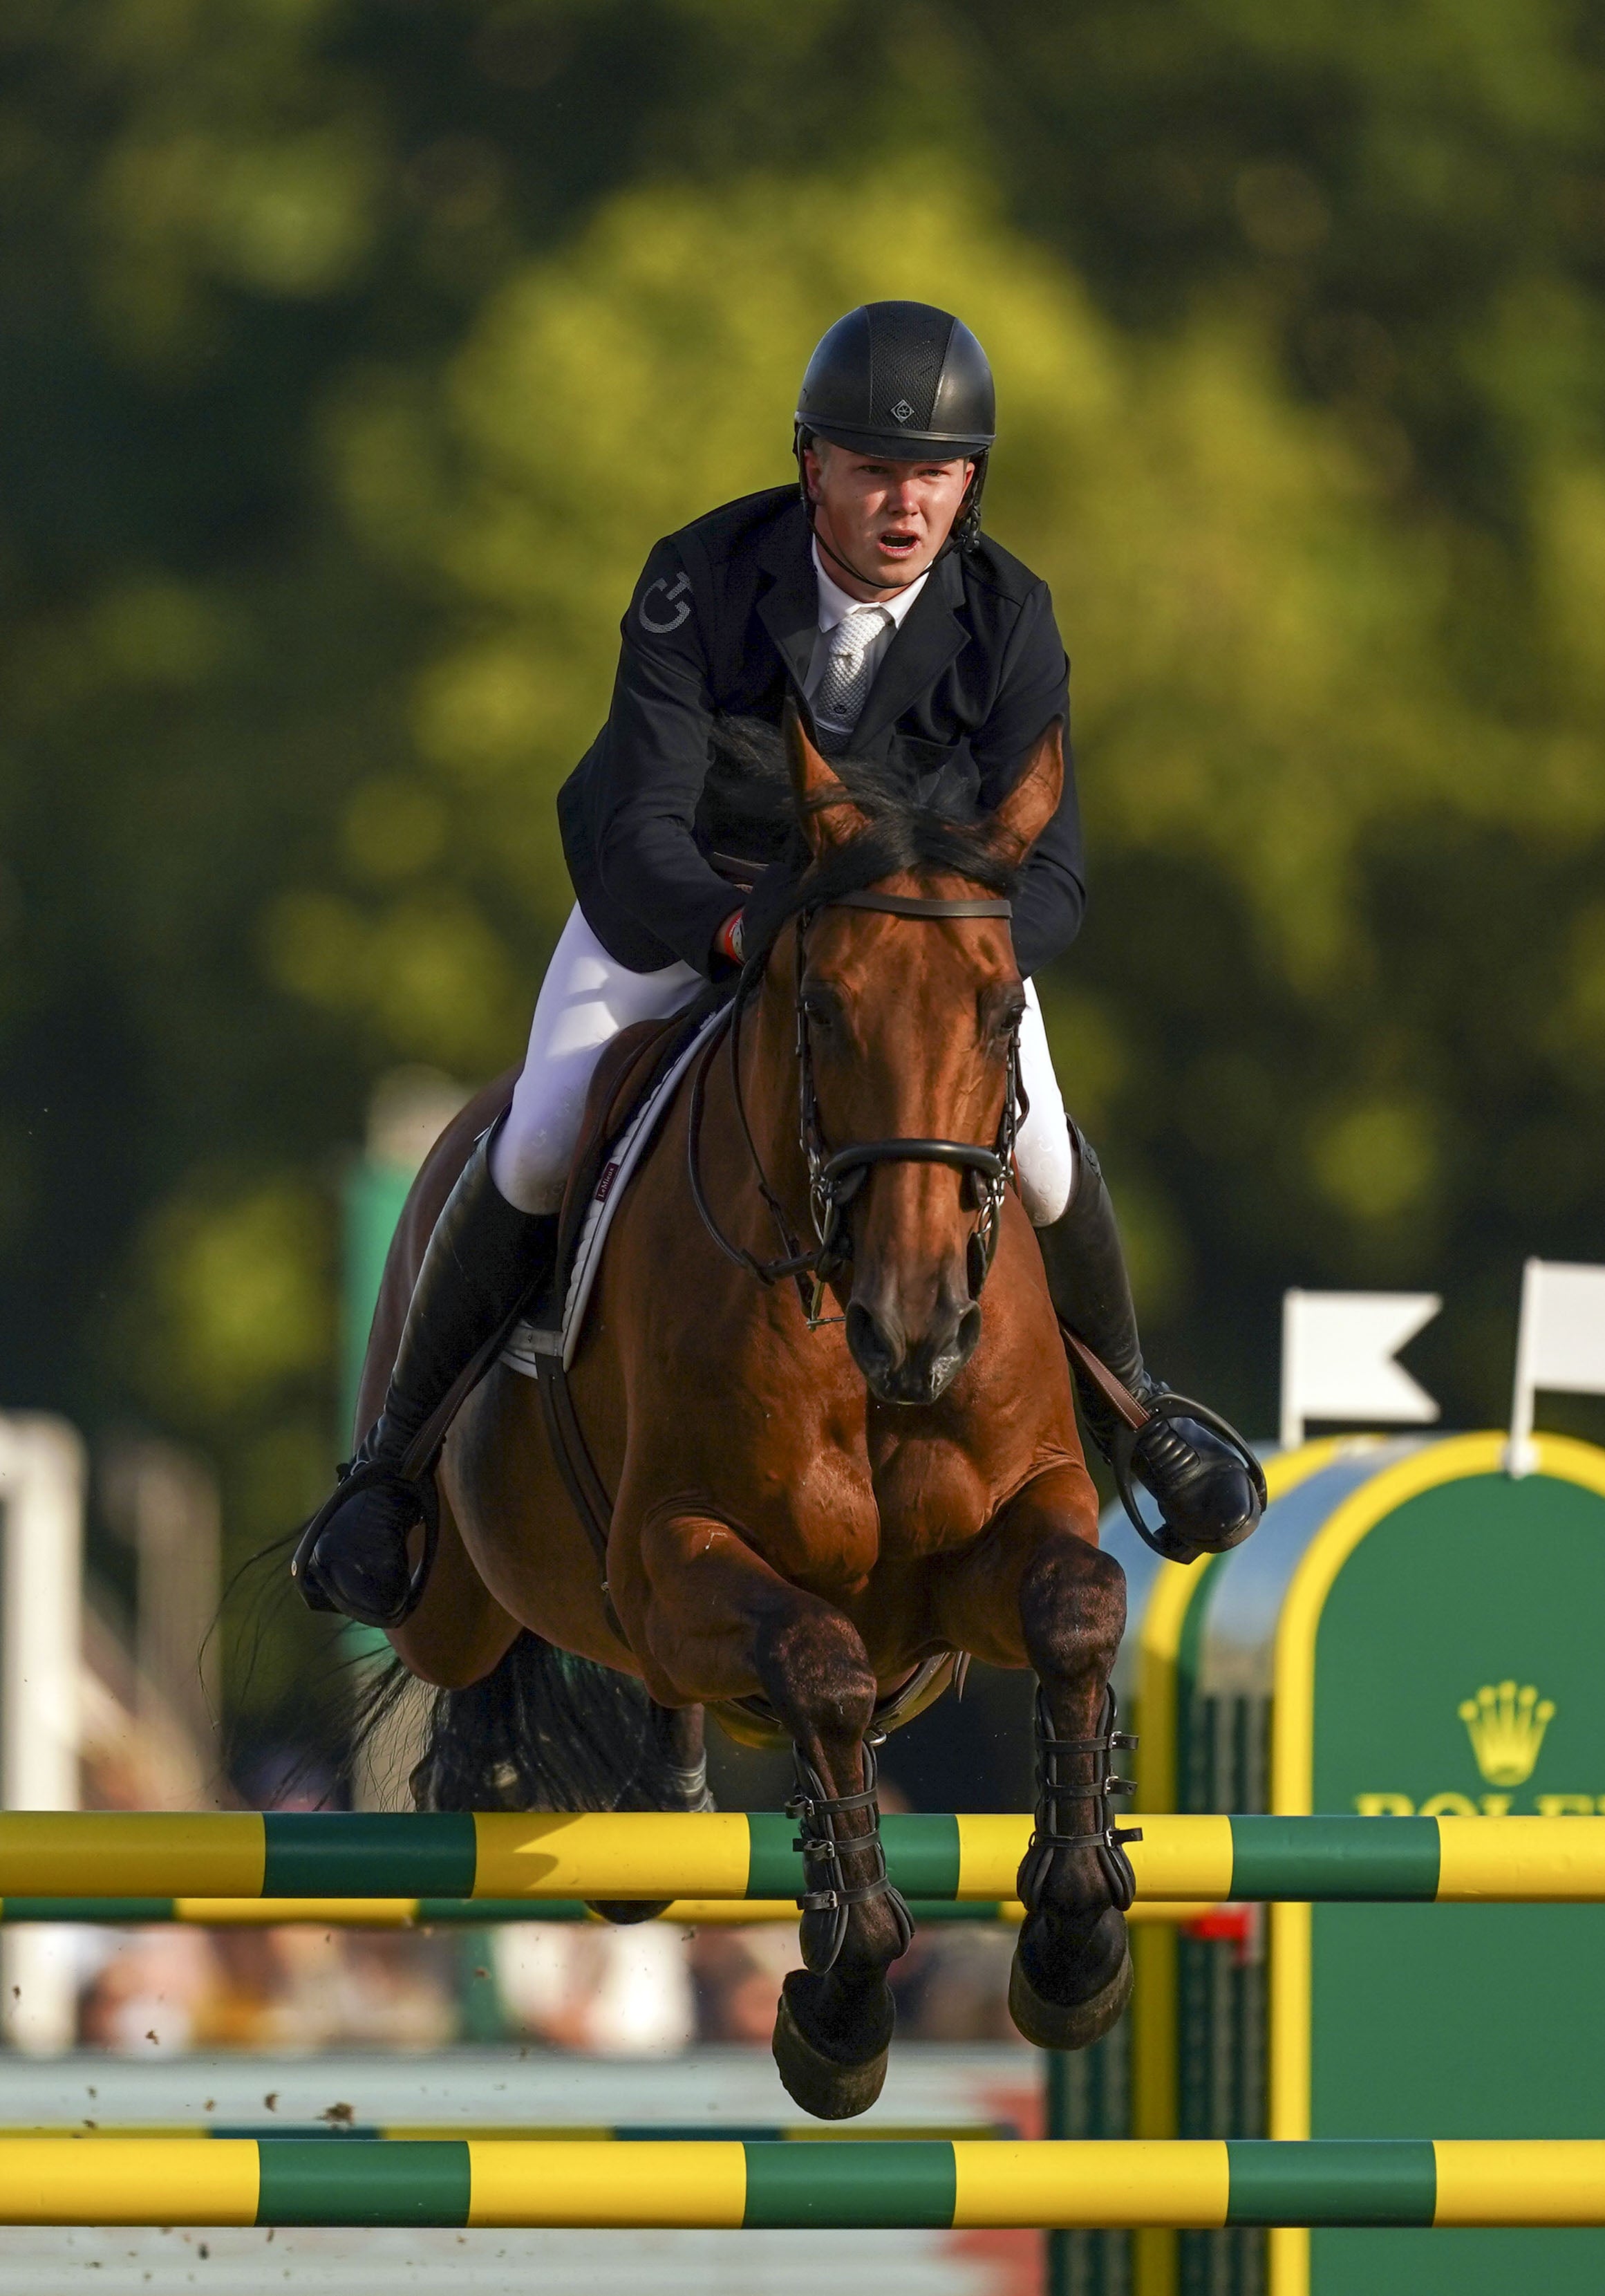 British showjumper Harry Charles qualified for the showjumping individual final in Tokyo.